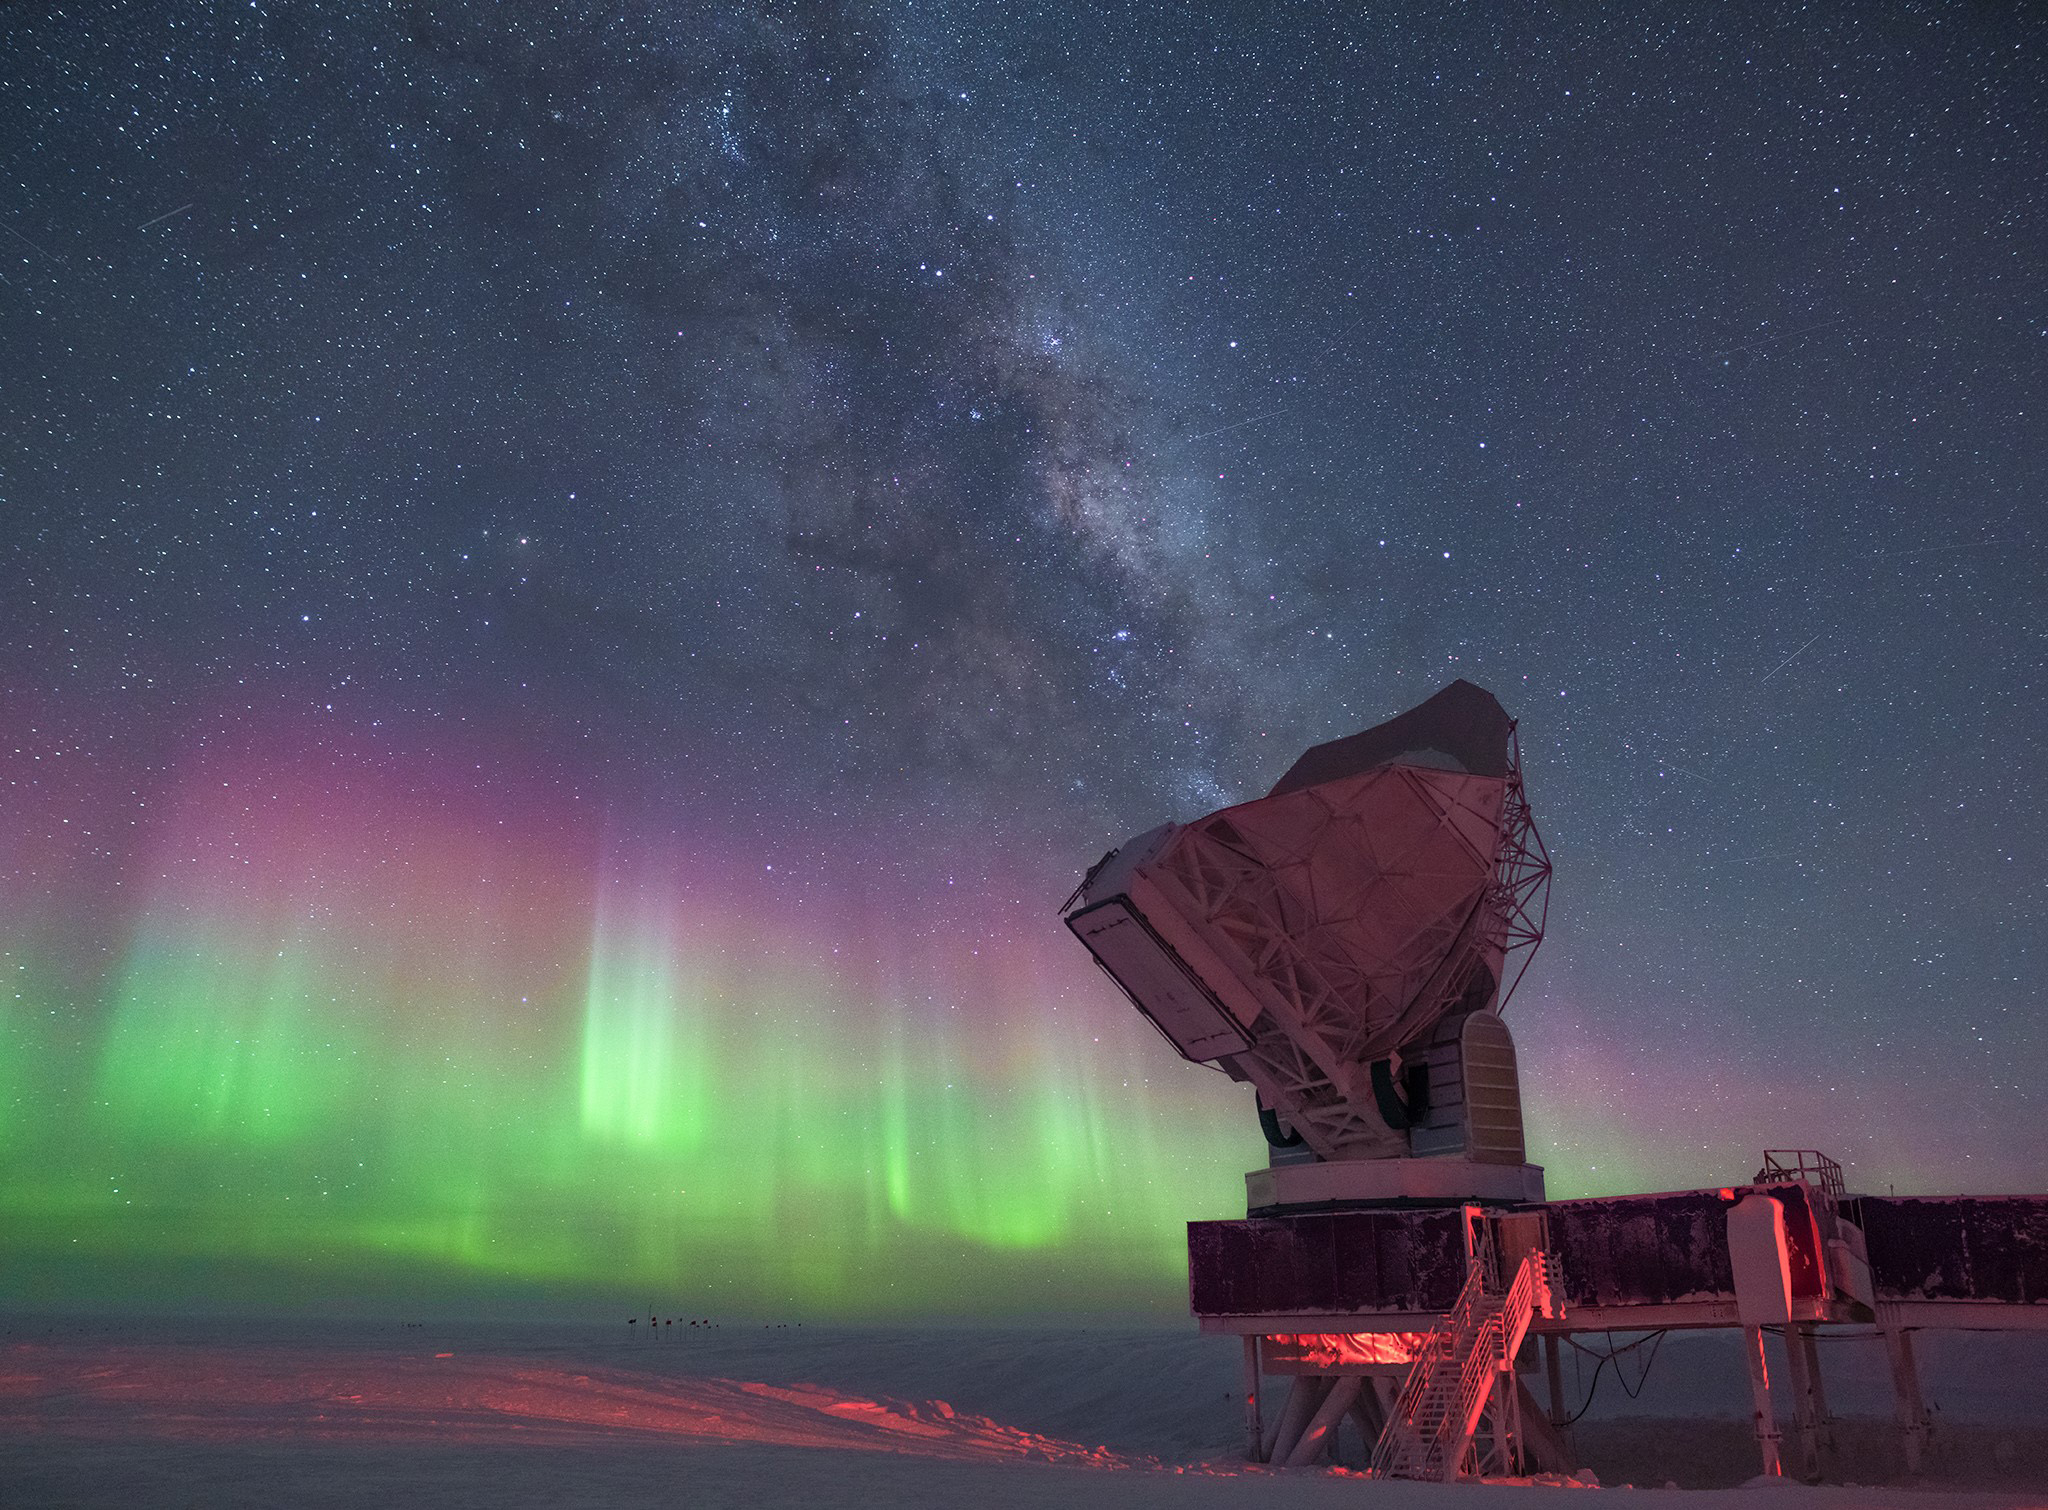 Green, pink and lavender auroras along with the Milky Way fill the sky above a large telescope.